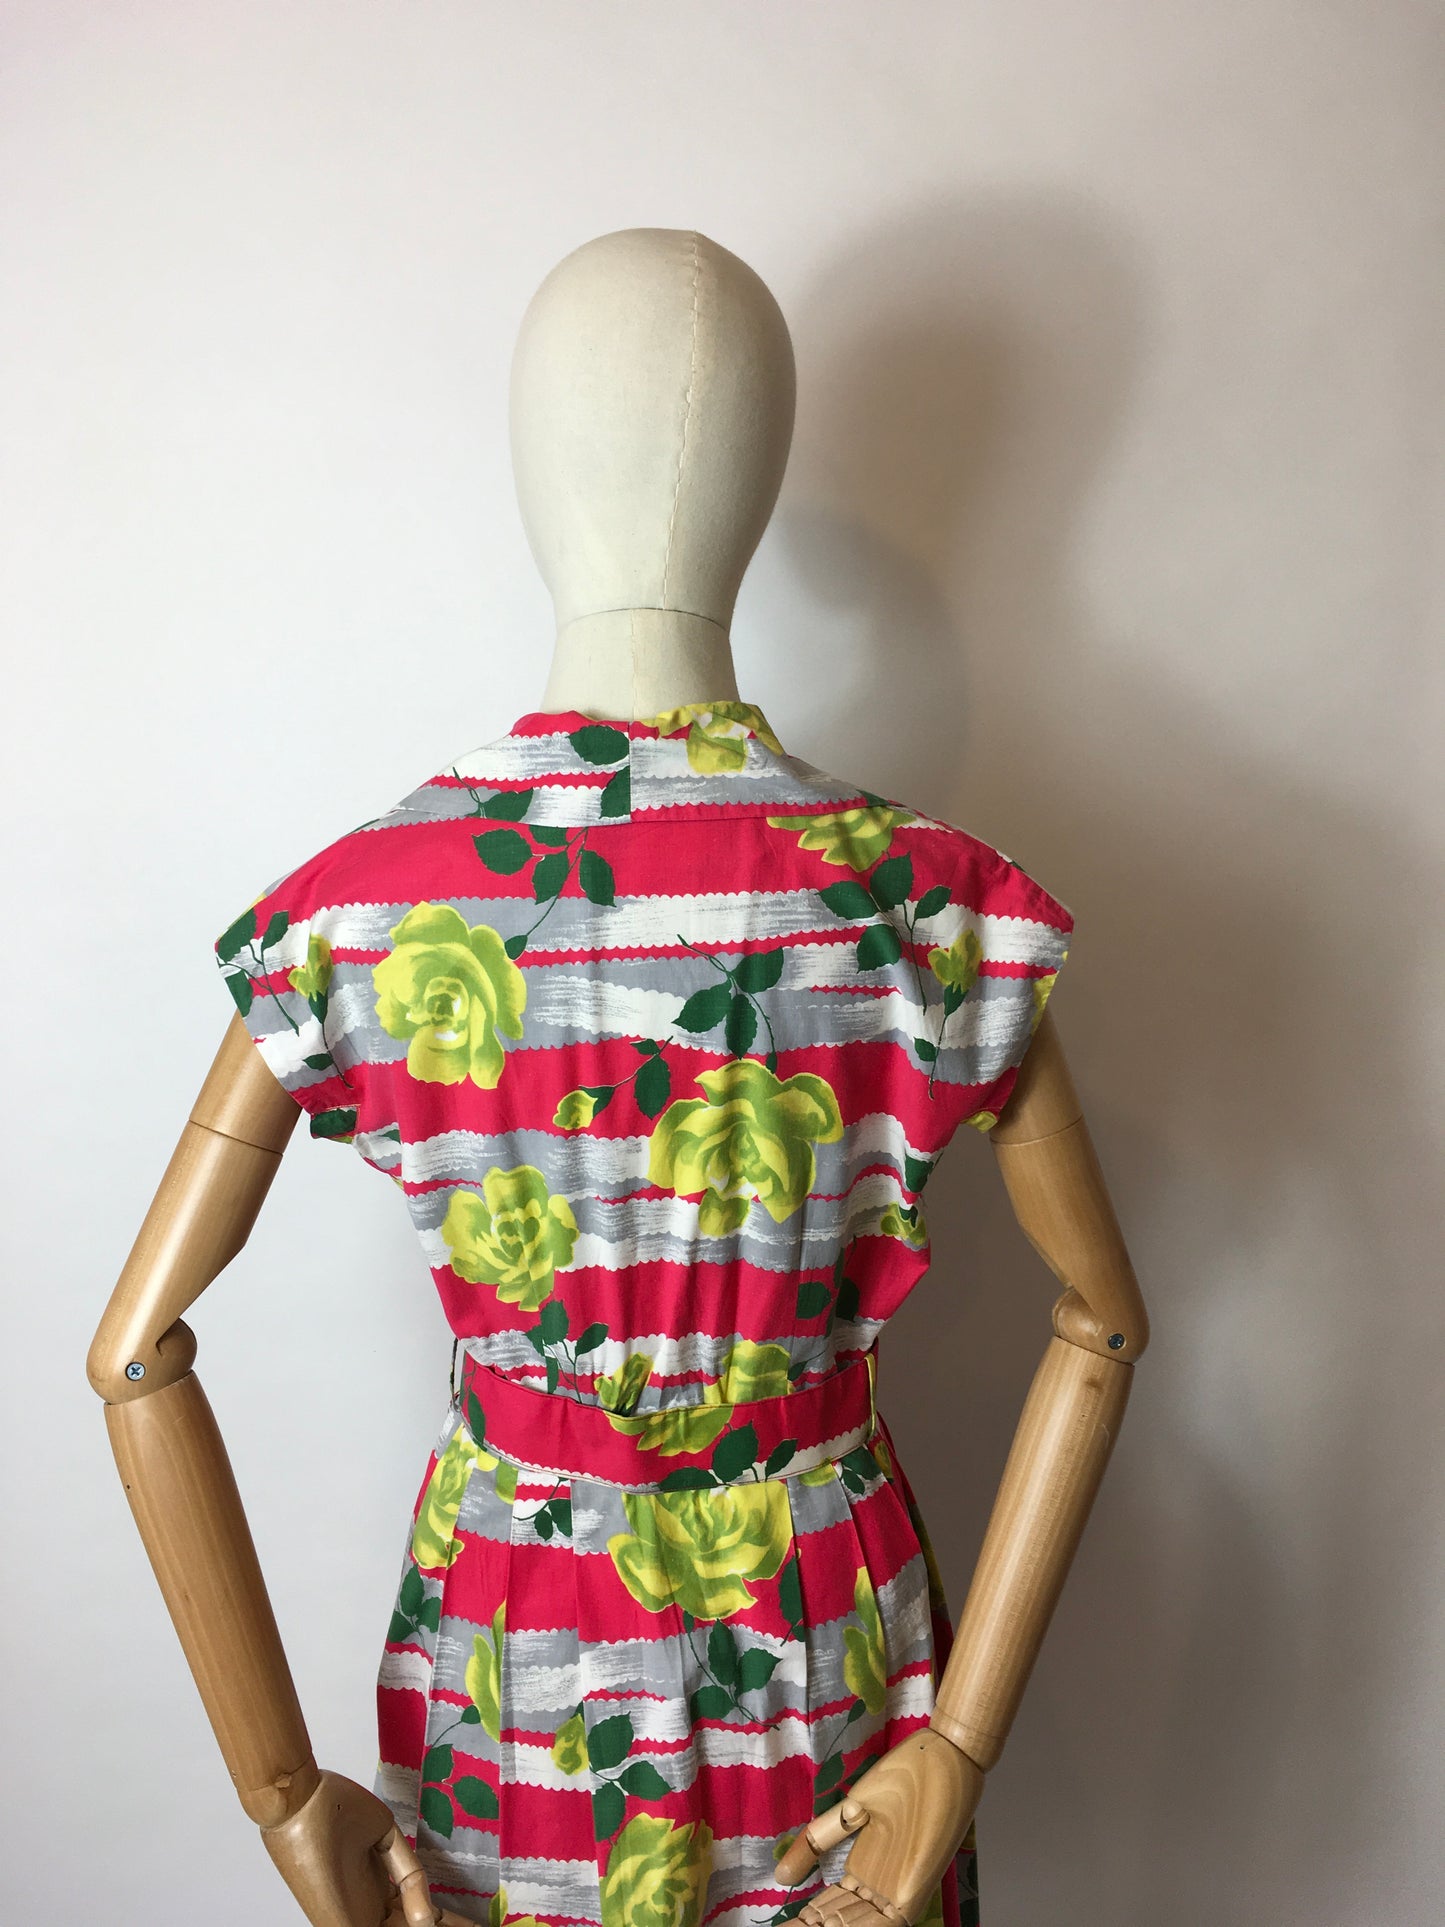 Original 1950s Cotton Day Dress - In a Fabulous Floral Cotton in Bright Pinks, Yellows & Greens